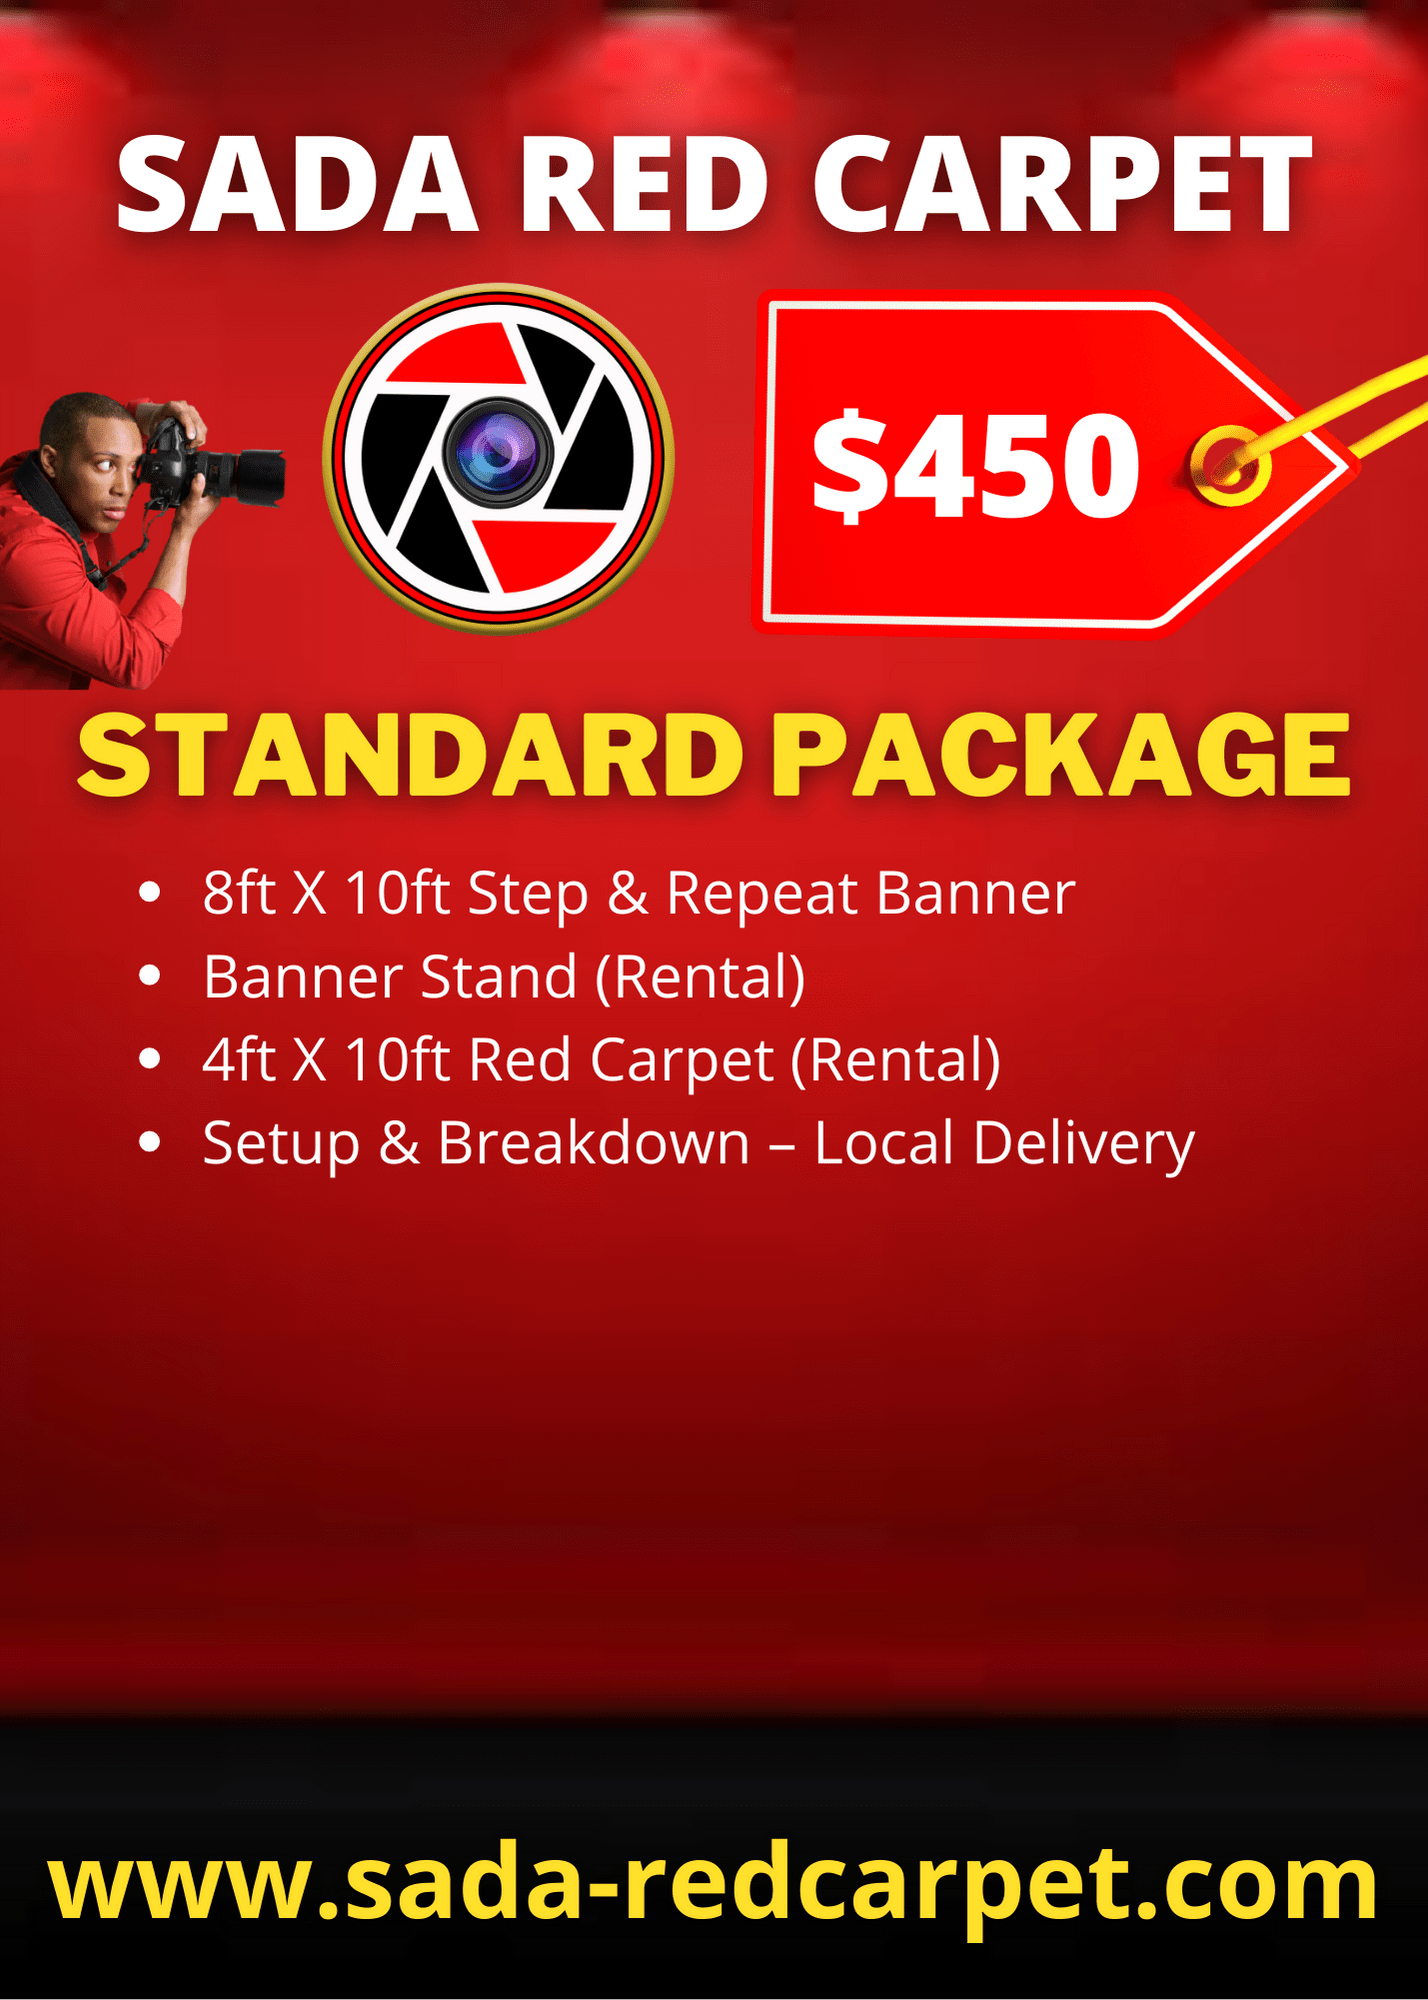 This package is our basic package that will give you and your guests an opportunity to share your event pictures with family and friends on social media.